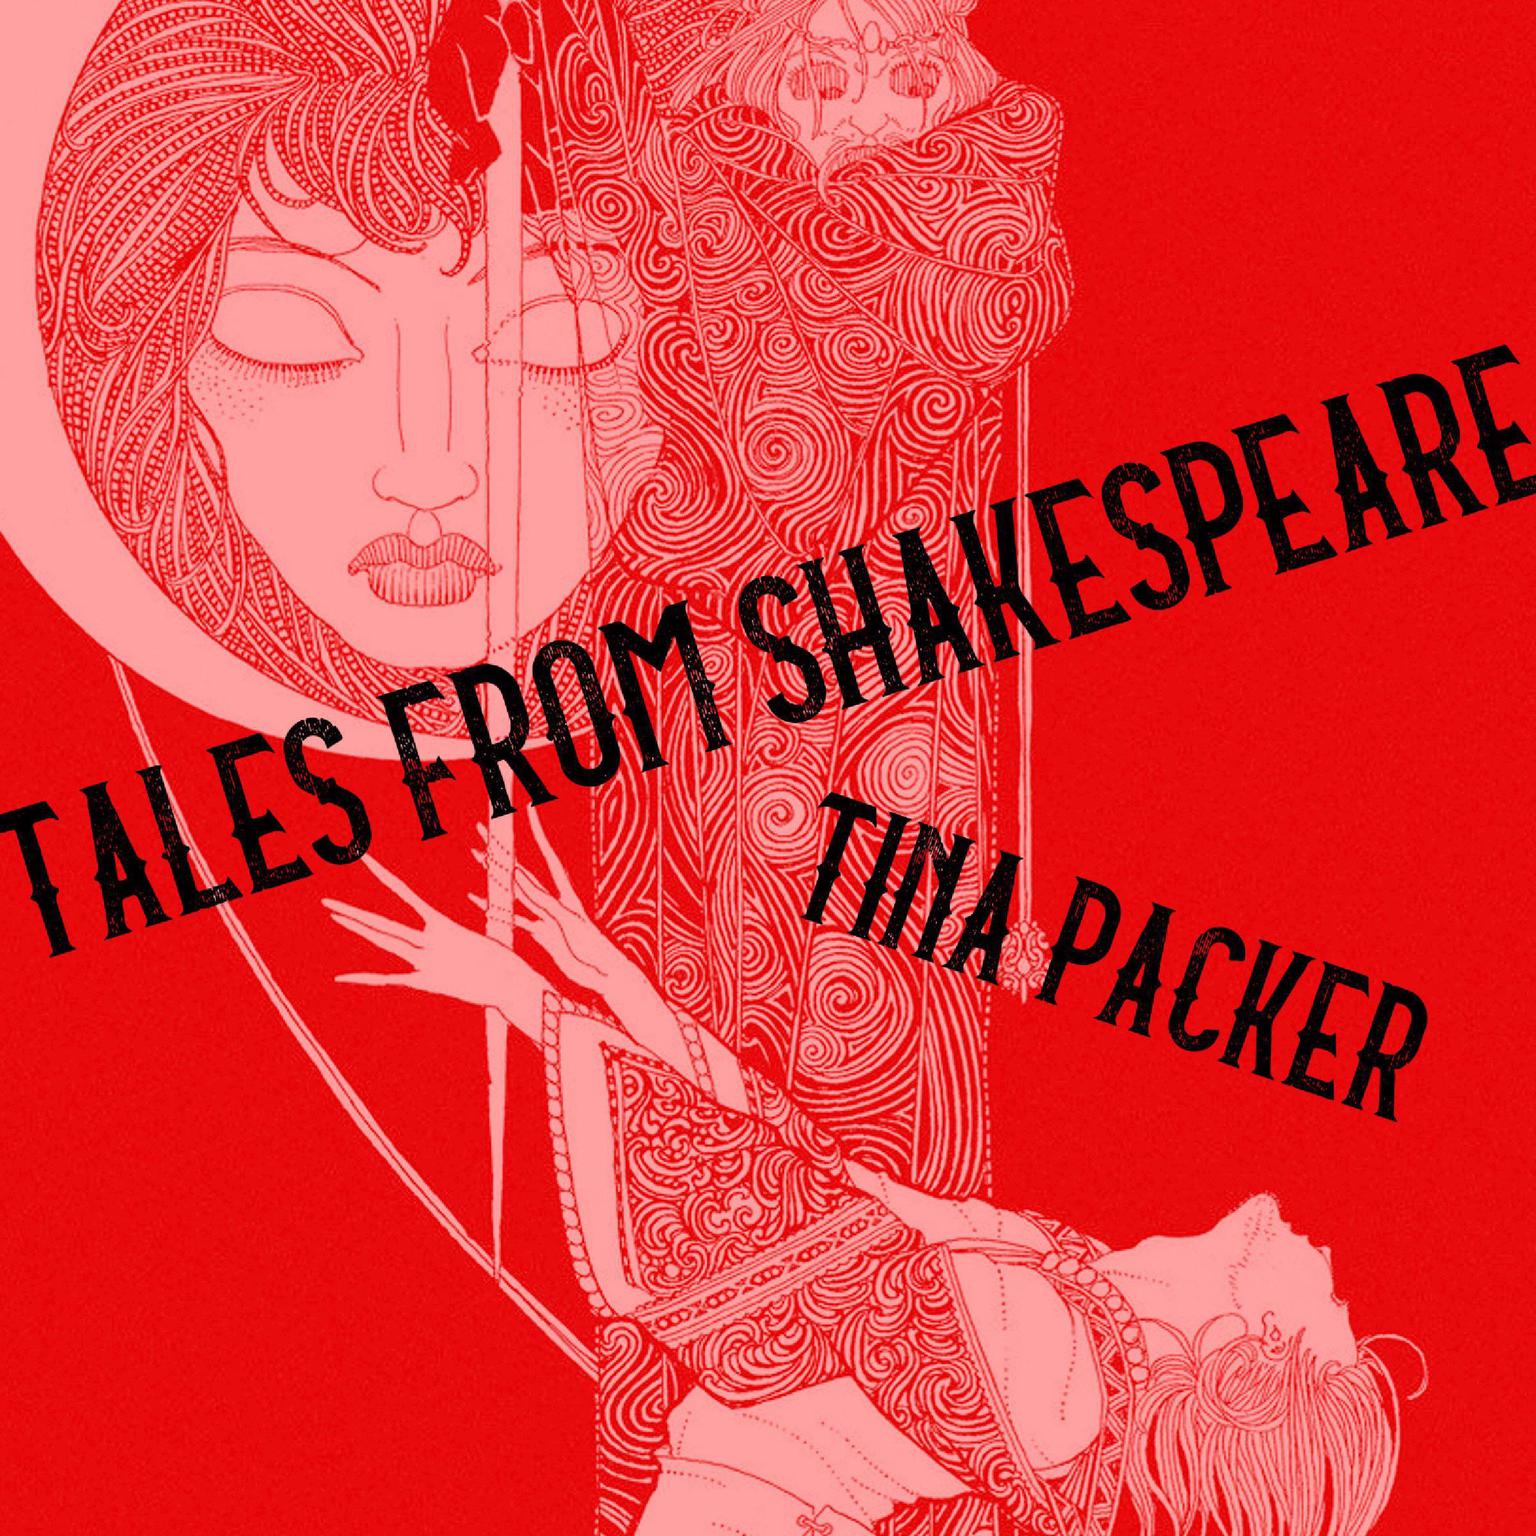 Tales from Shakespeare Audiobook, by Tina Packer